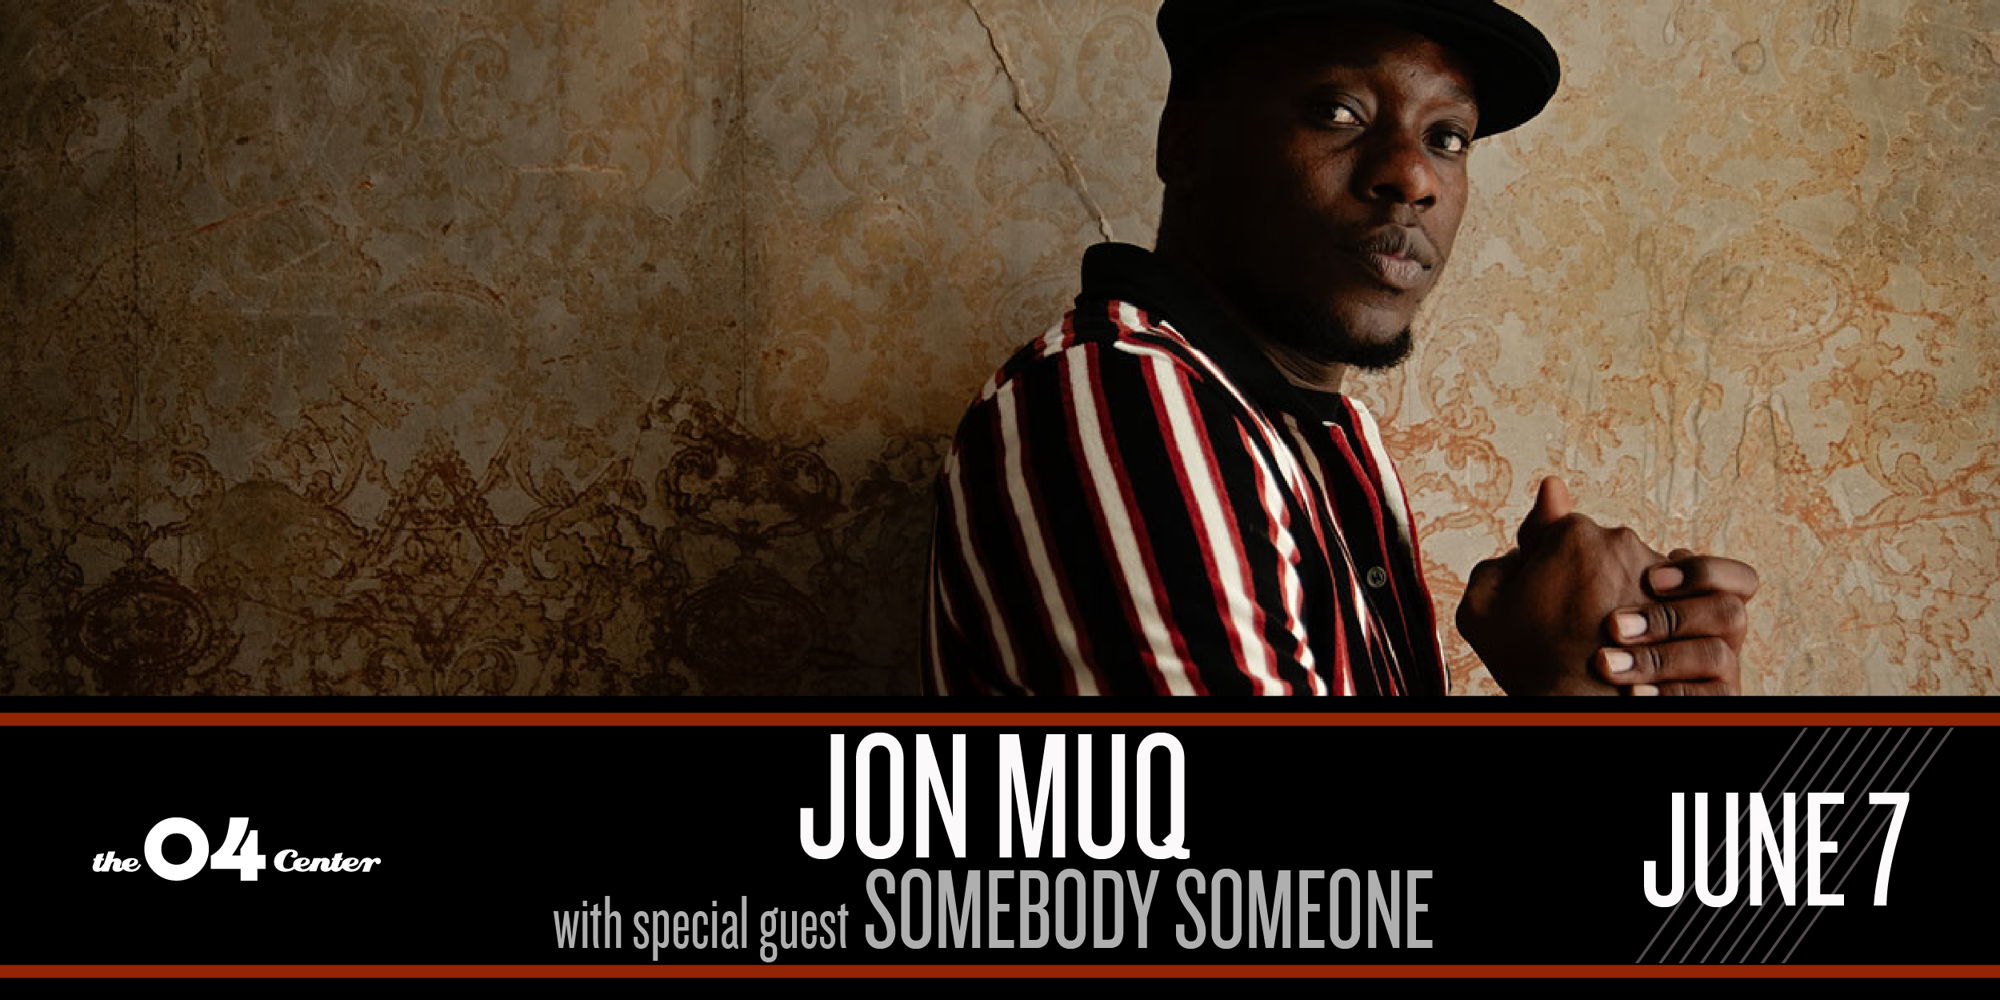 Jon Muq with special guest Somebody Someone promotional image